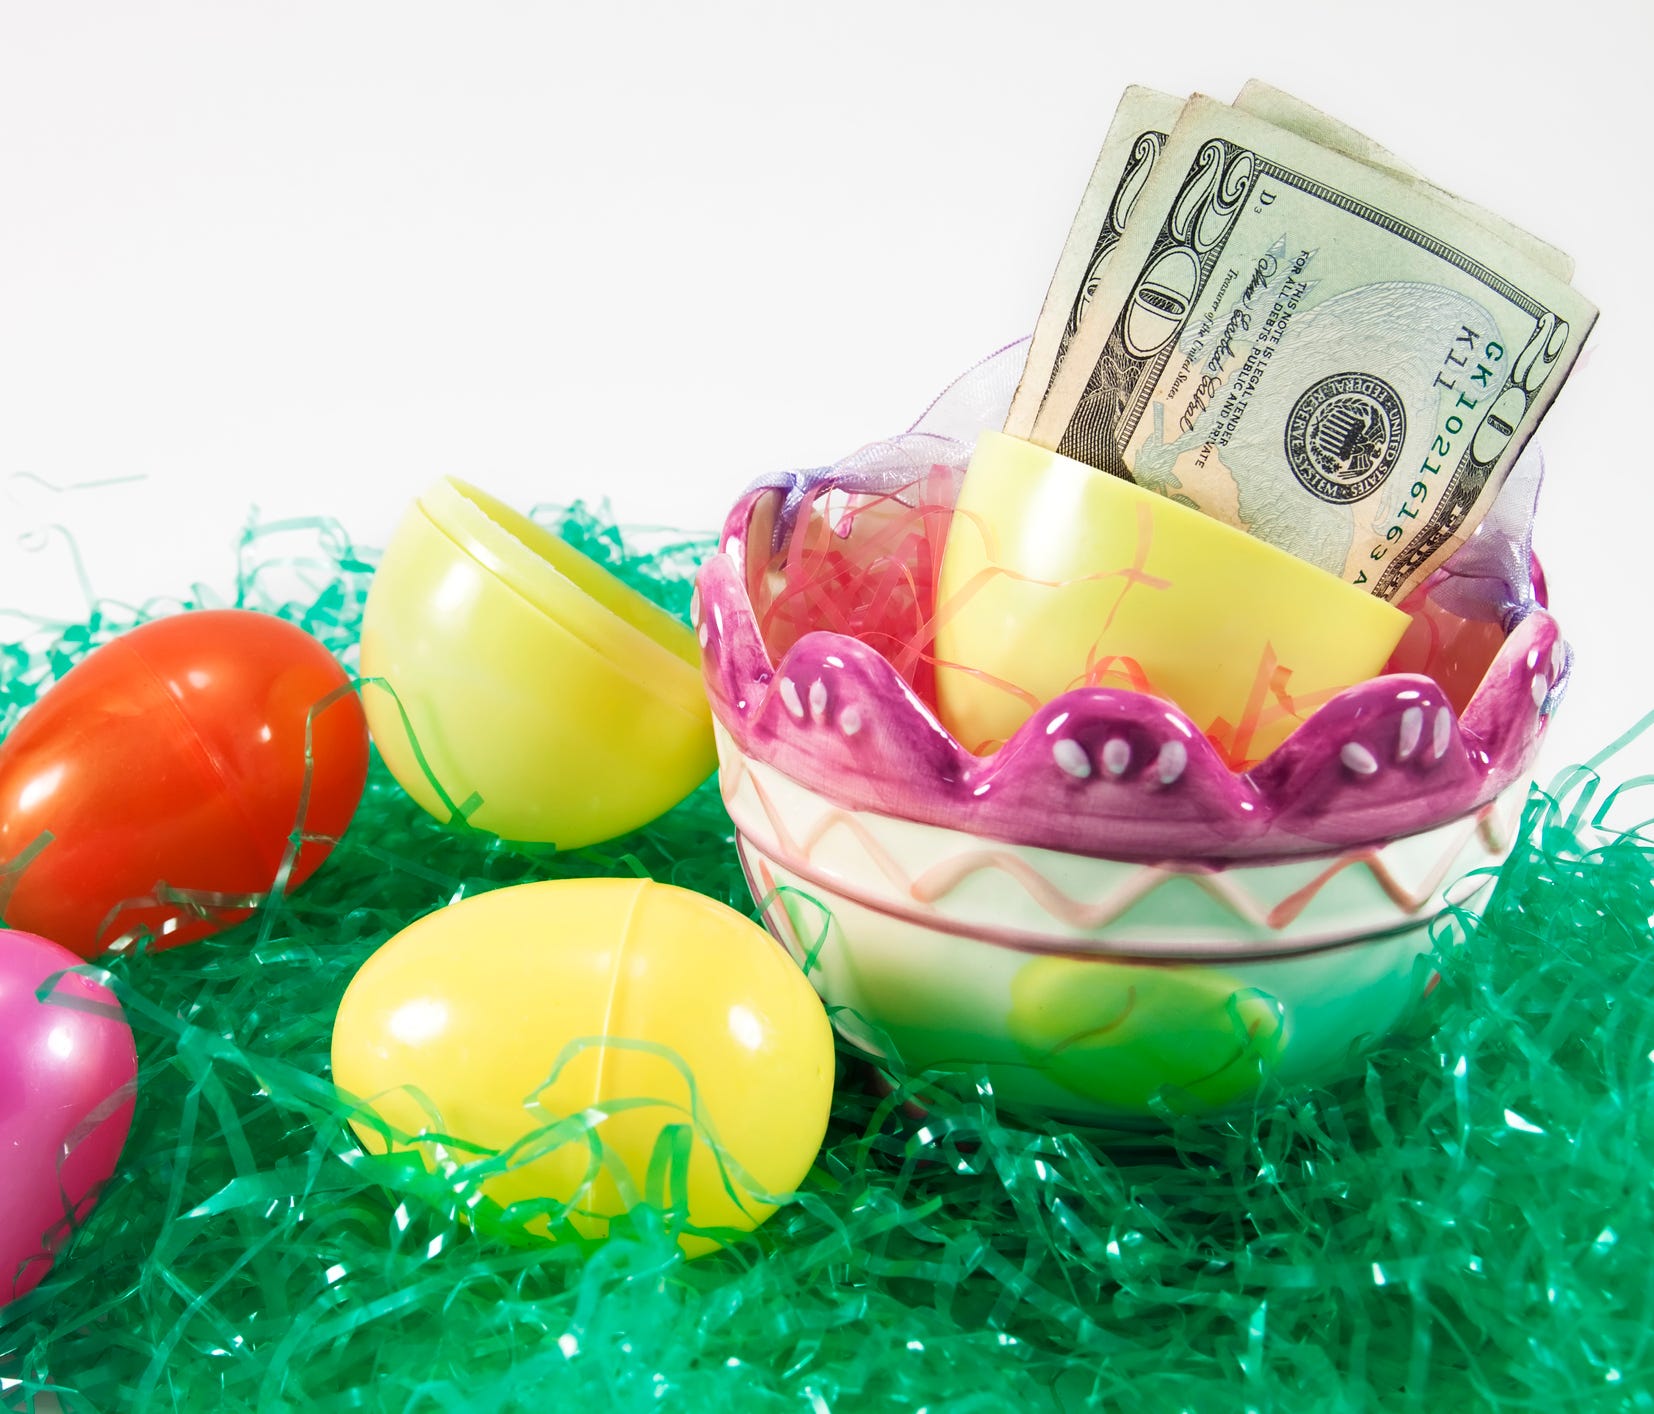 Consumers are expected to dish out $18.4 billion for the Easter holiday, according to the National Retail Federation. That would be an all-time high in the survey's 14-year history.